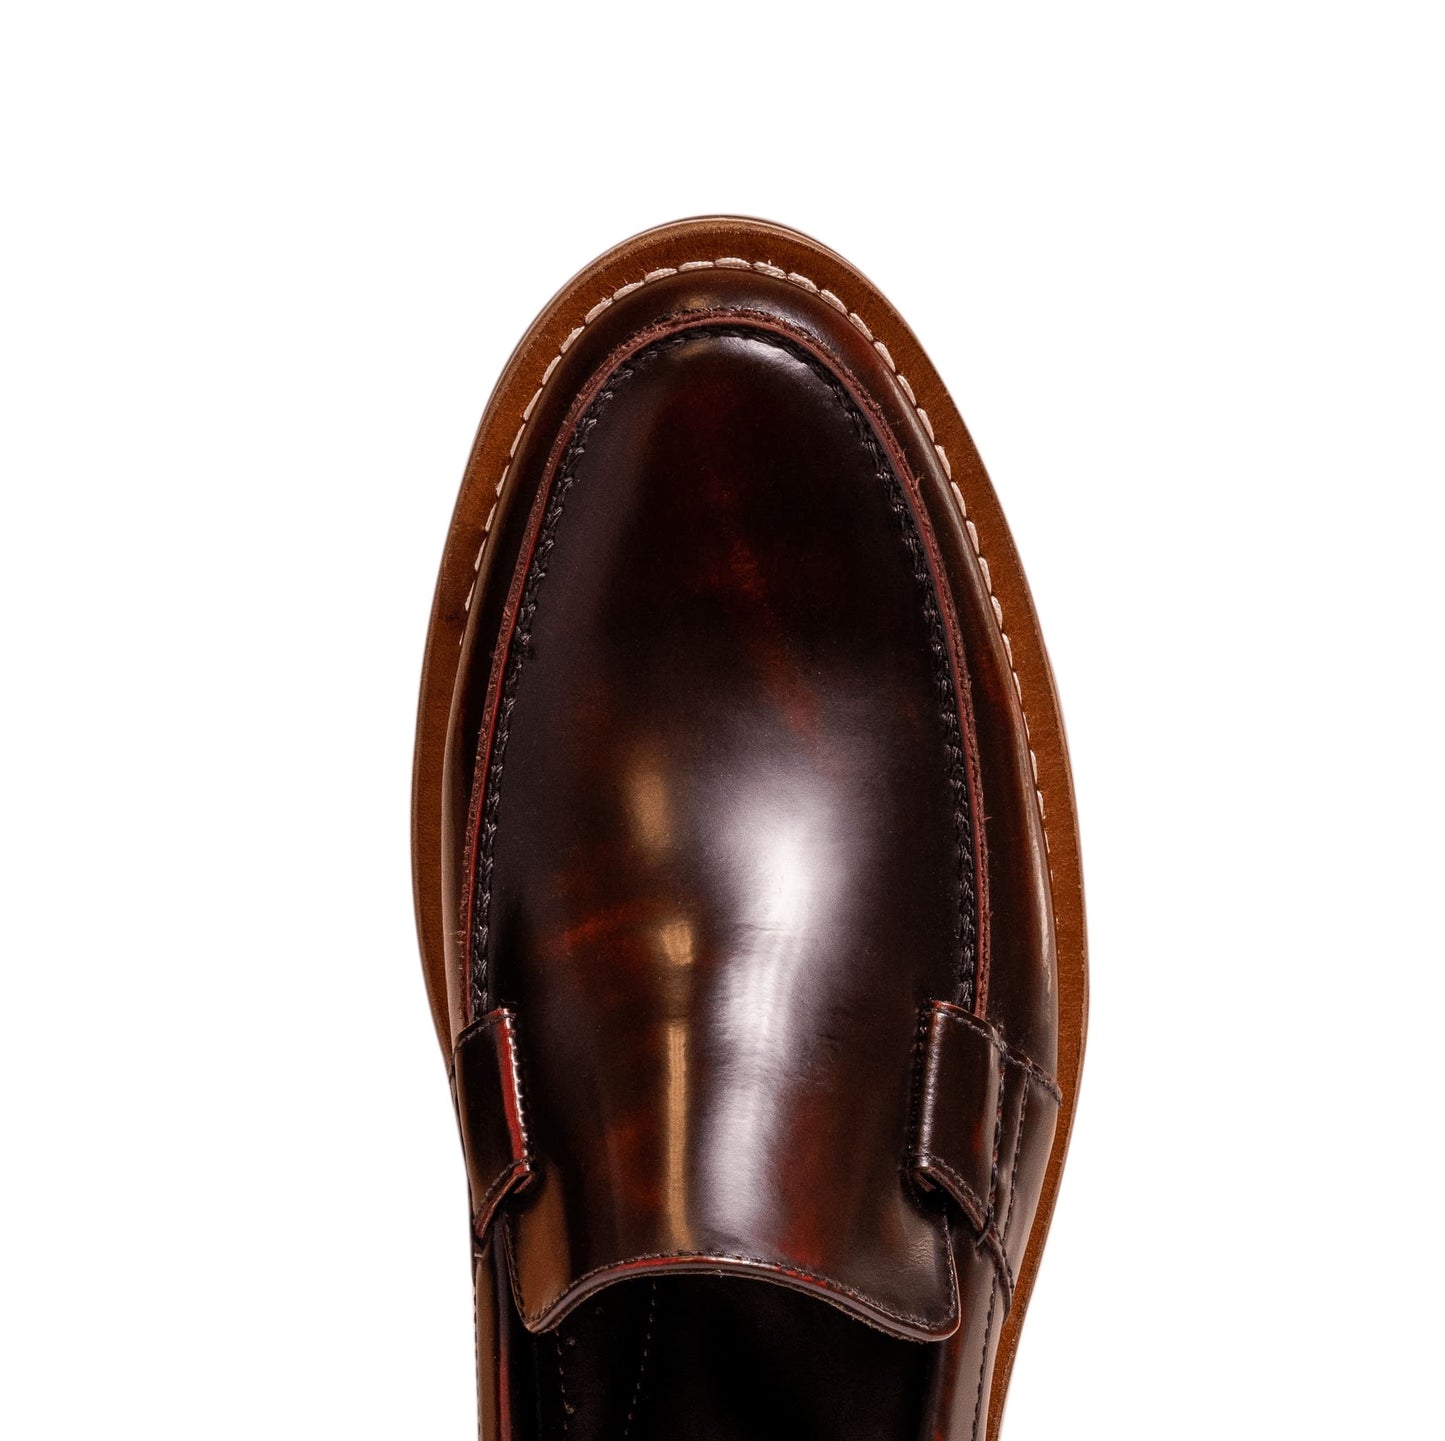 HELM Shoes The Wilson Burgundy